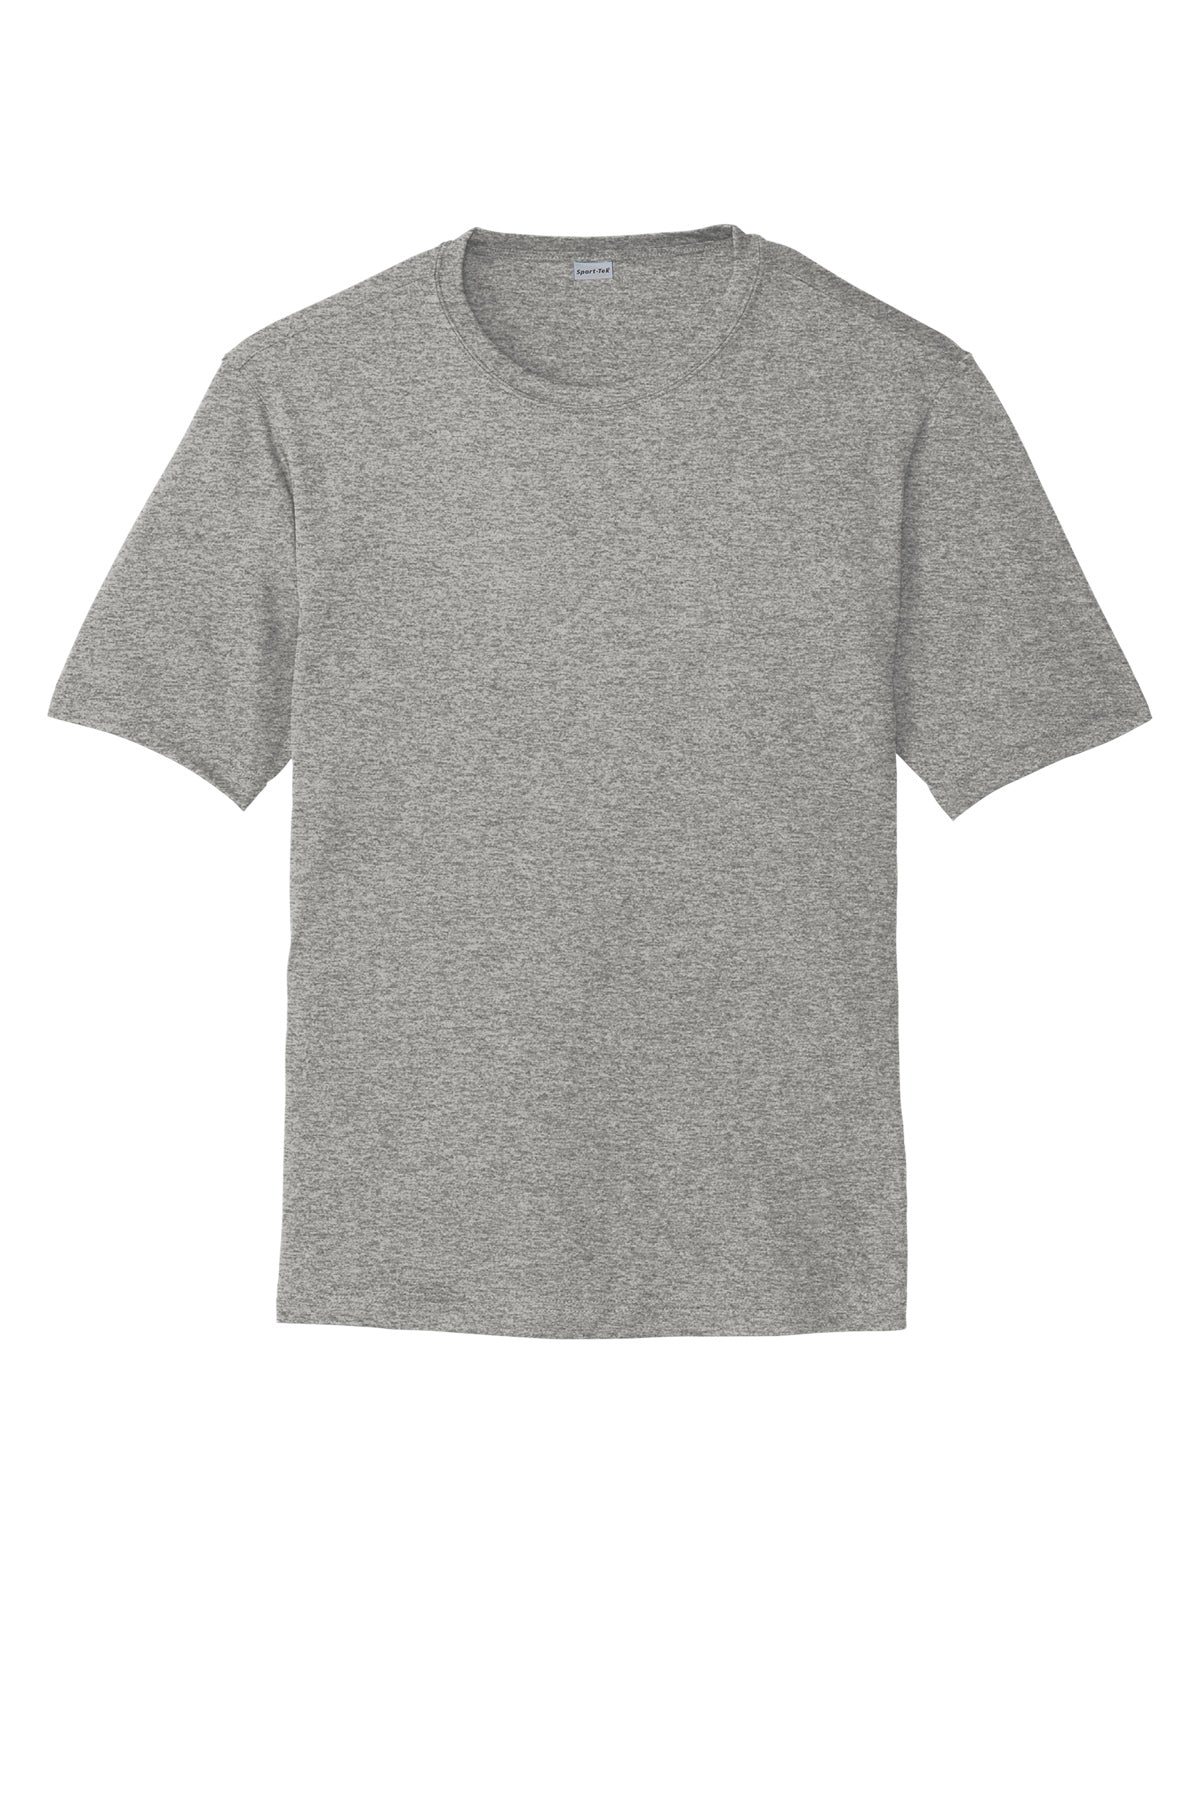 Sport-Tek St350 Polyester Adult T-Shirt Ad Small / Gray Concrete Heather